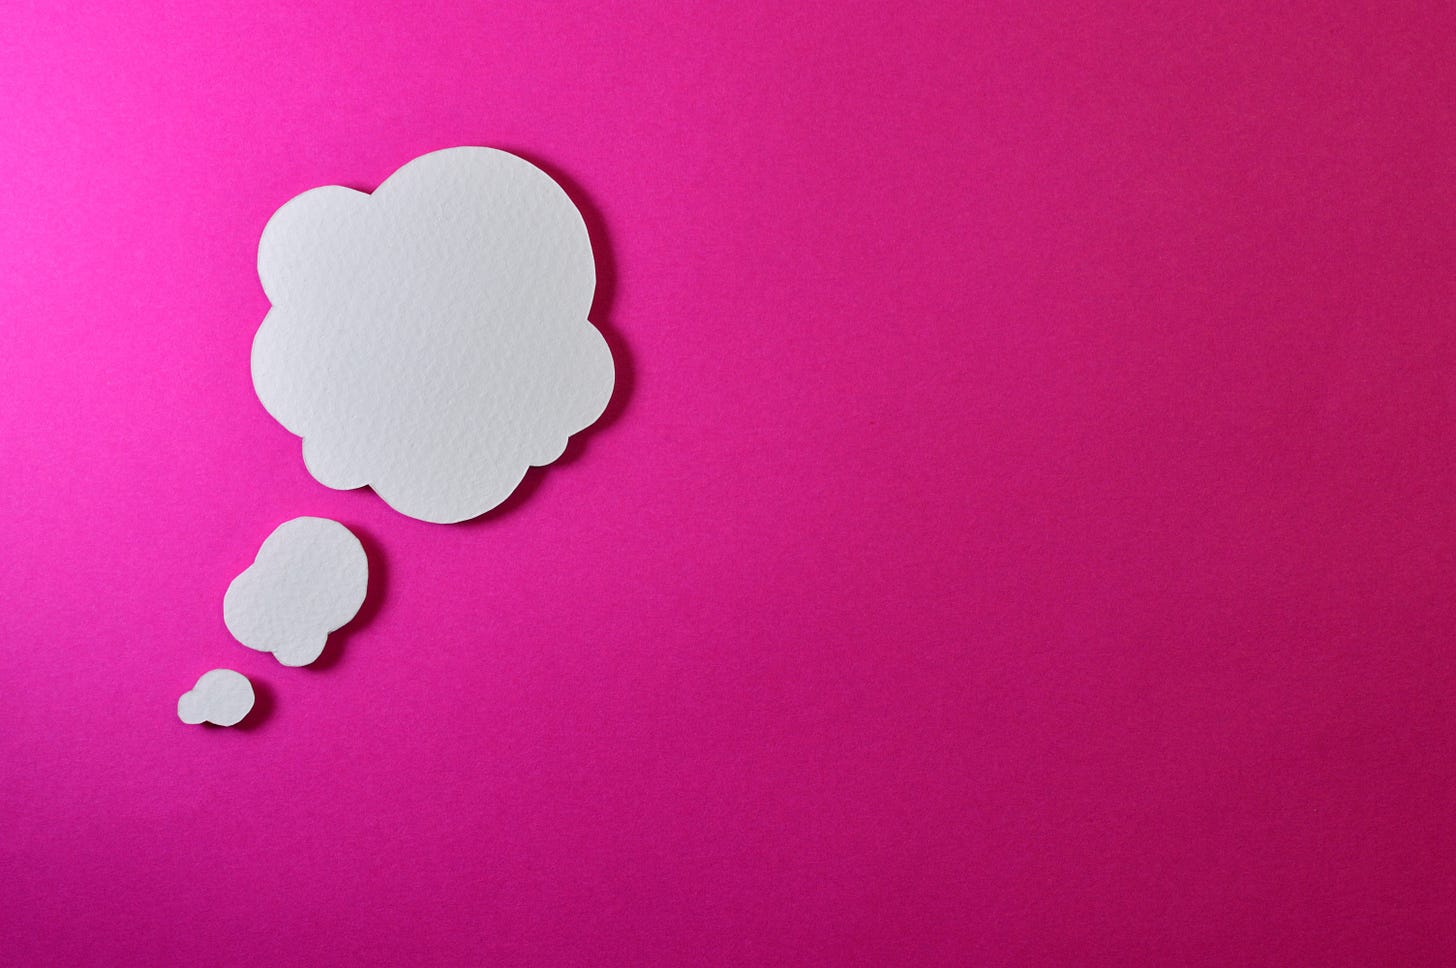 white thought bubble on pink background